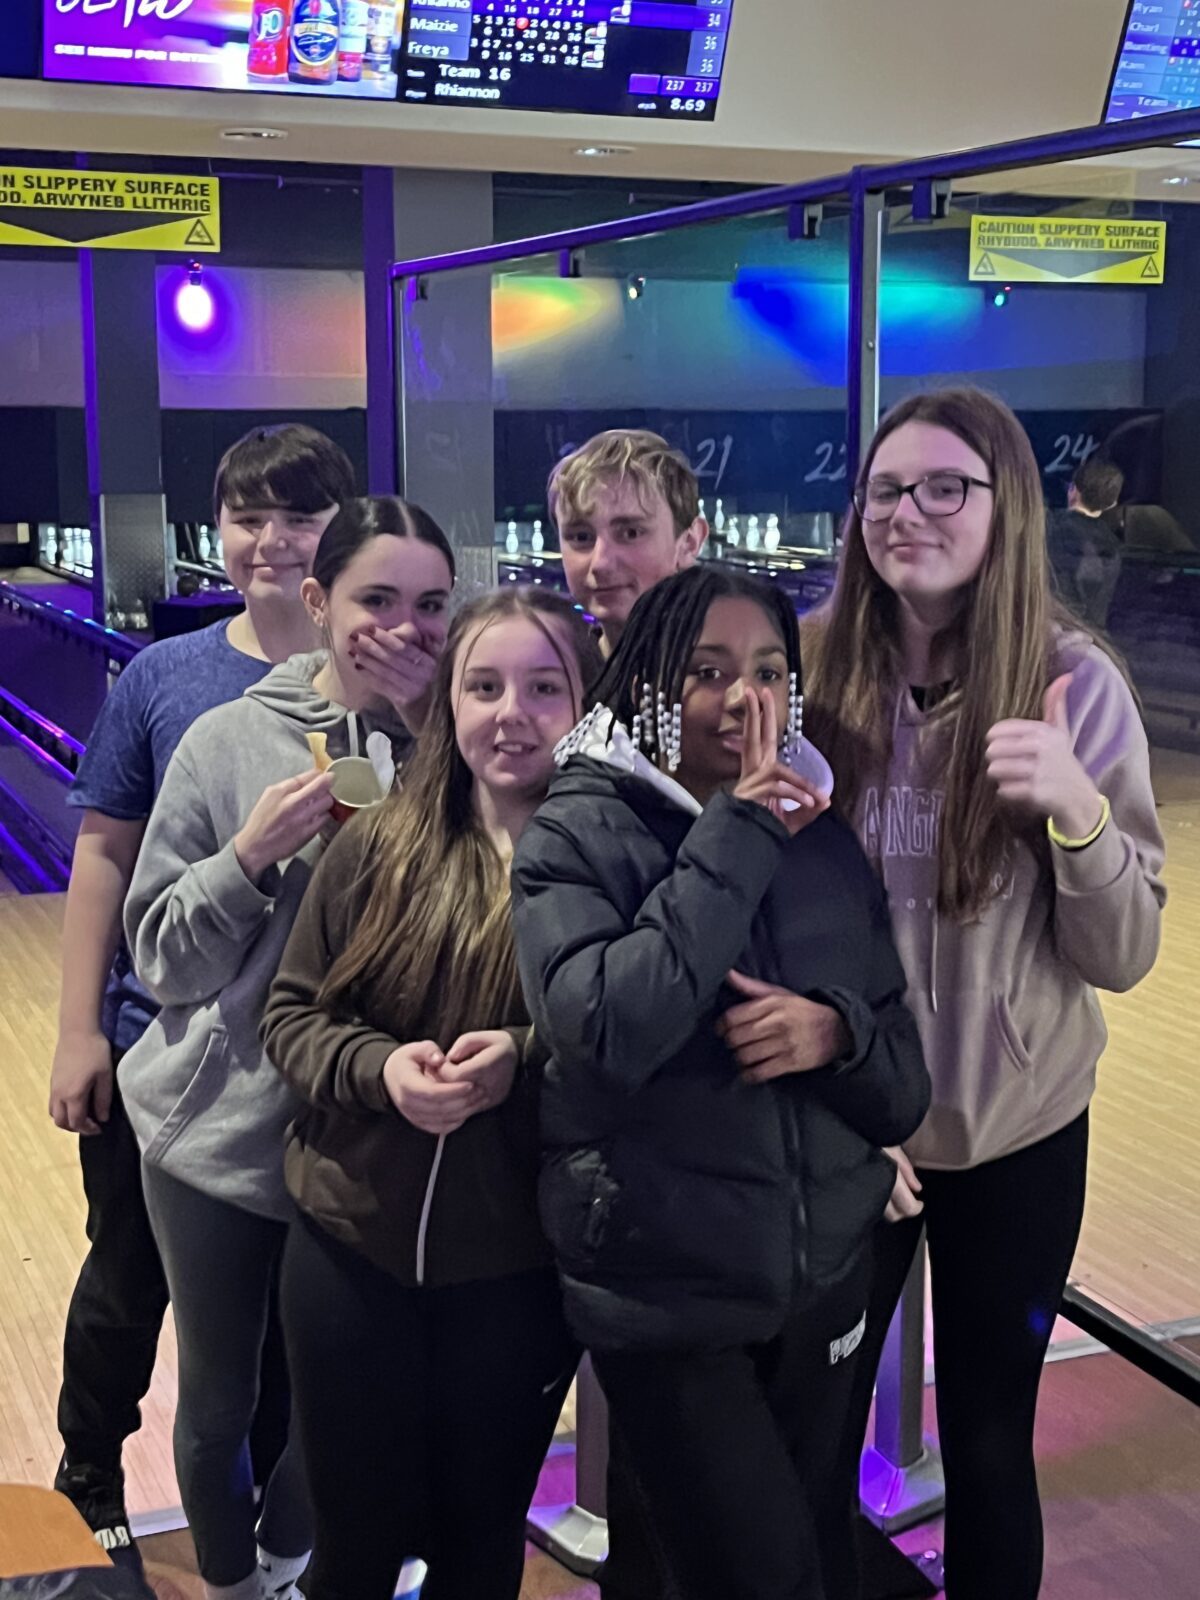 Year 9 went ten pin bowling as a reward for the excellent performance in school.